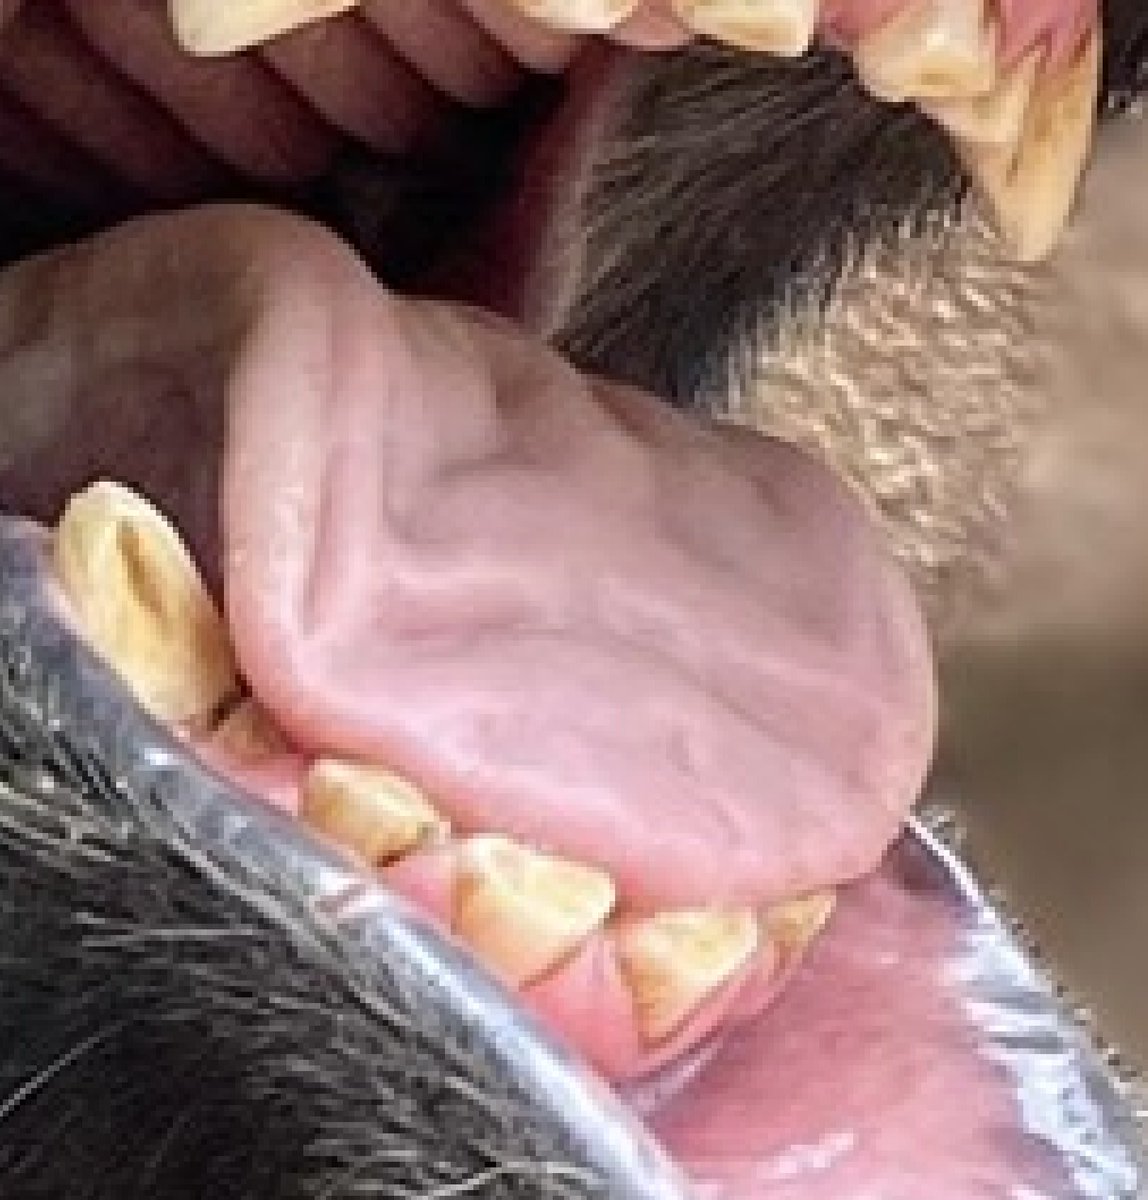 It’s time for another Guess the Tooth feature, presented by @DeltaDentalCO! Take a look at the teeth below and see if you can correctly guess the animal they belong to. Drop your guesses in the comments below and be sure to check back in tomorrow for the answer! 🦷